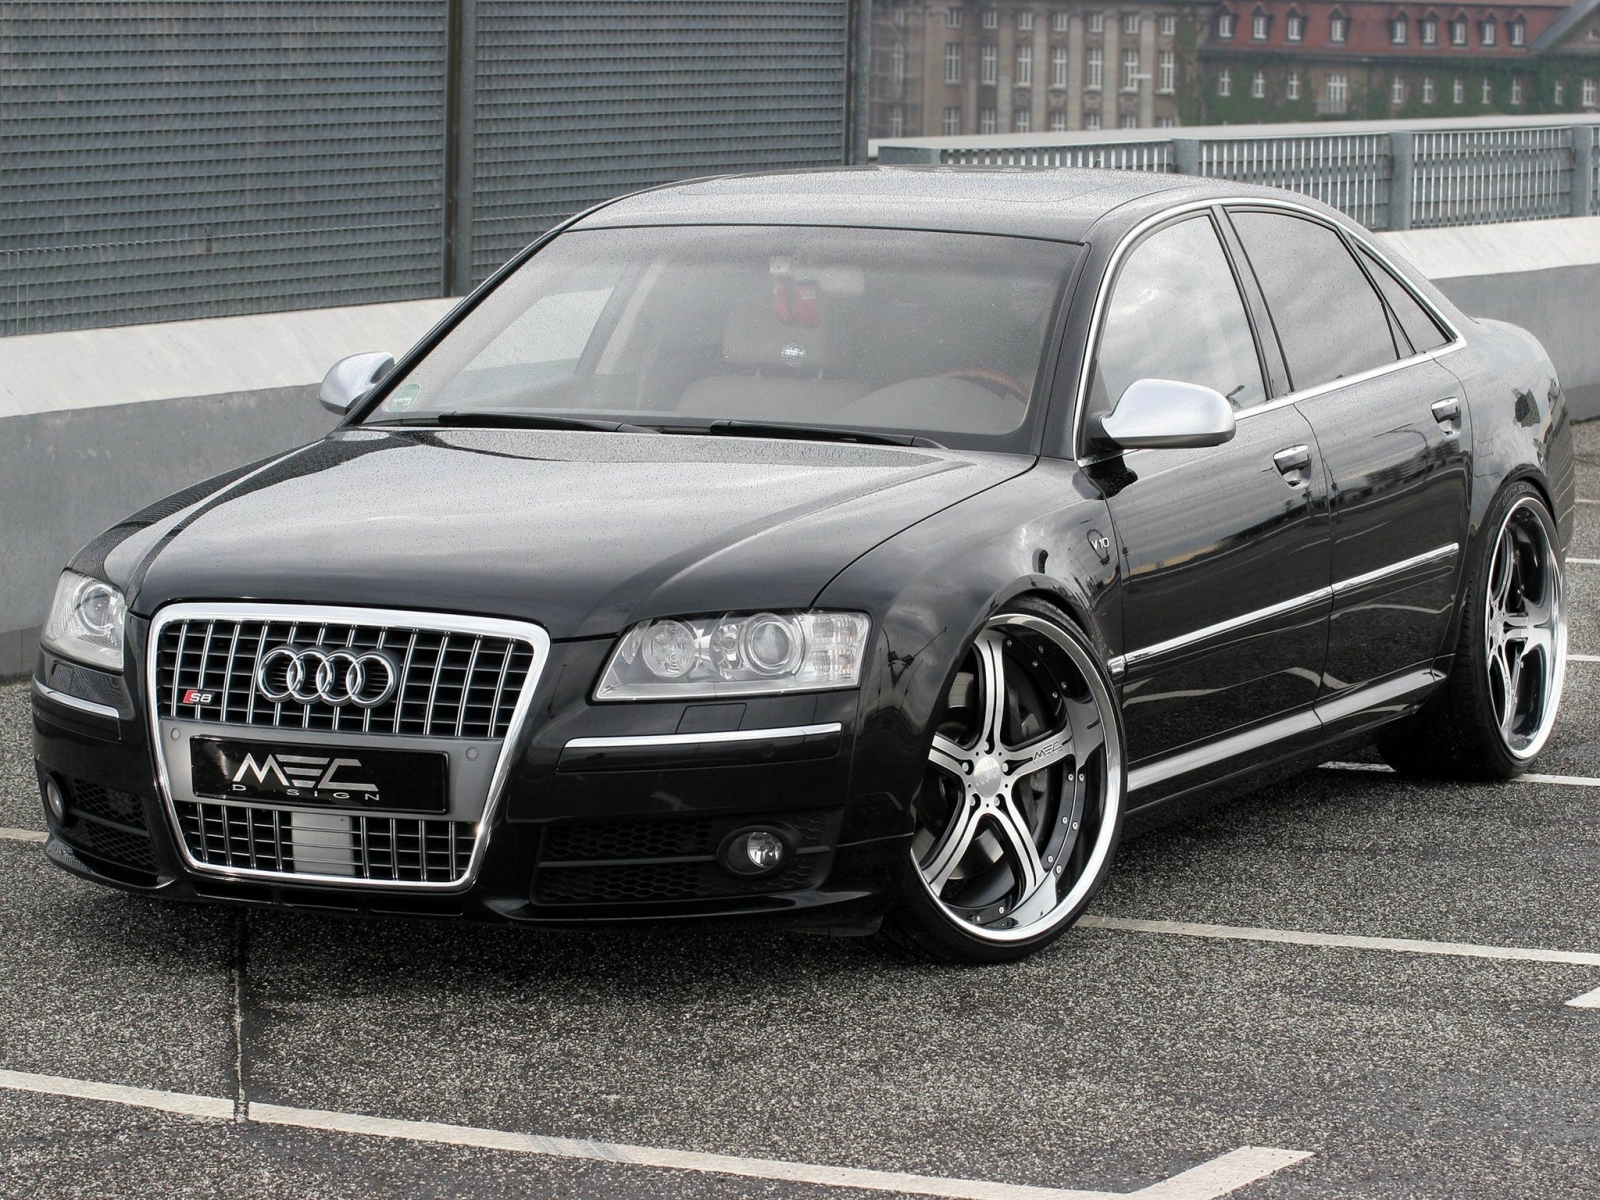 Audi S8 HD Wallpaper Background Image Photos Pictures Yl